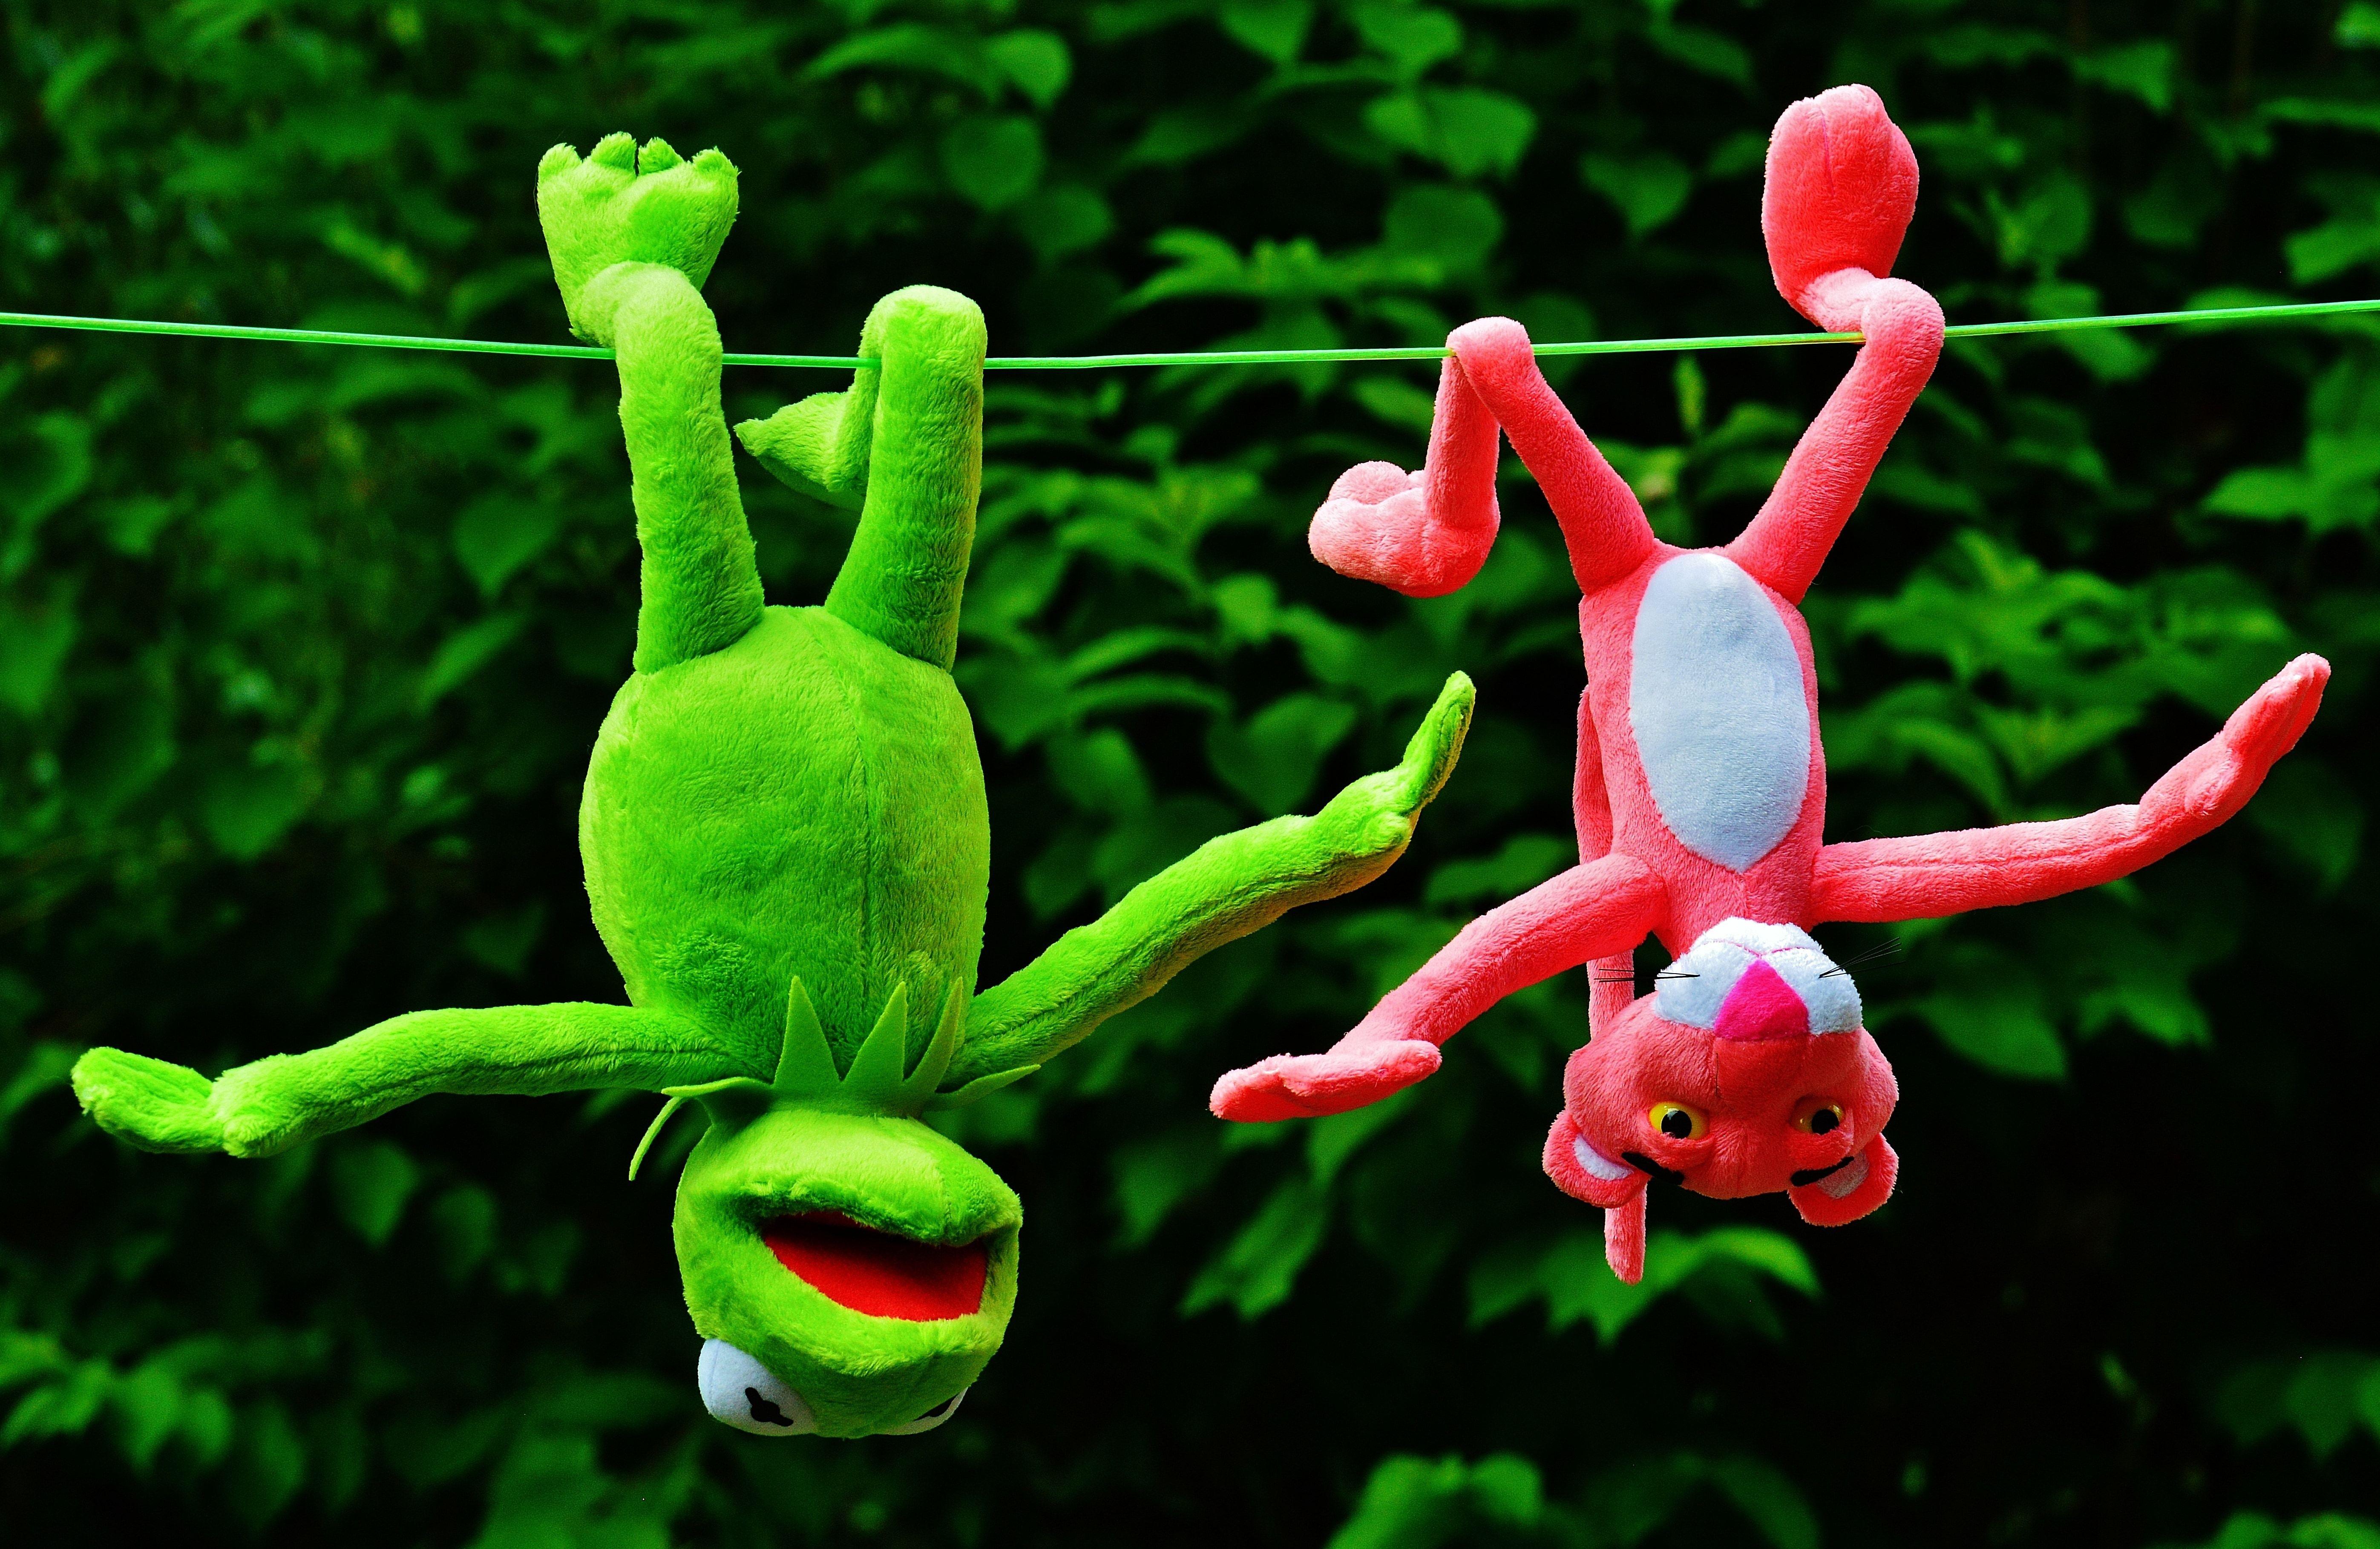 kermit the frog and pink panther plush toys free image